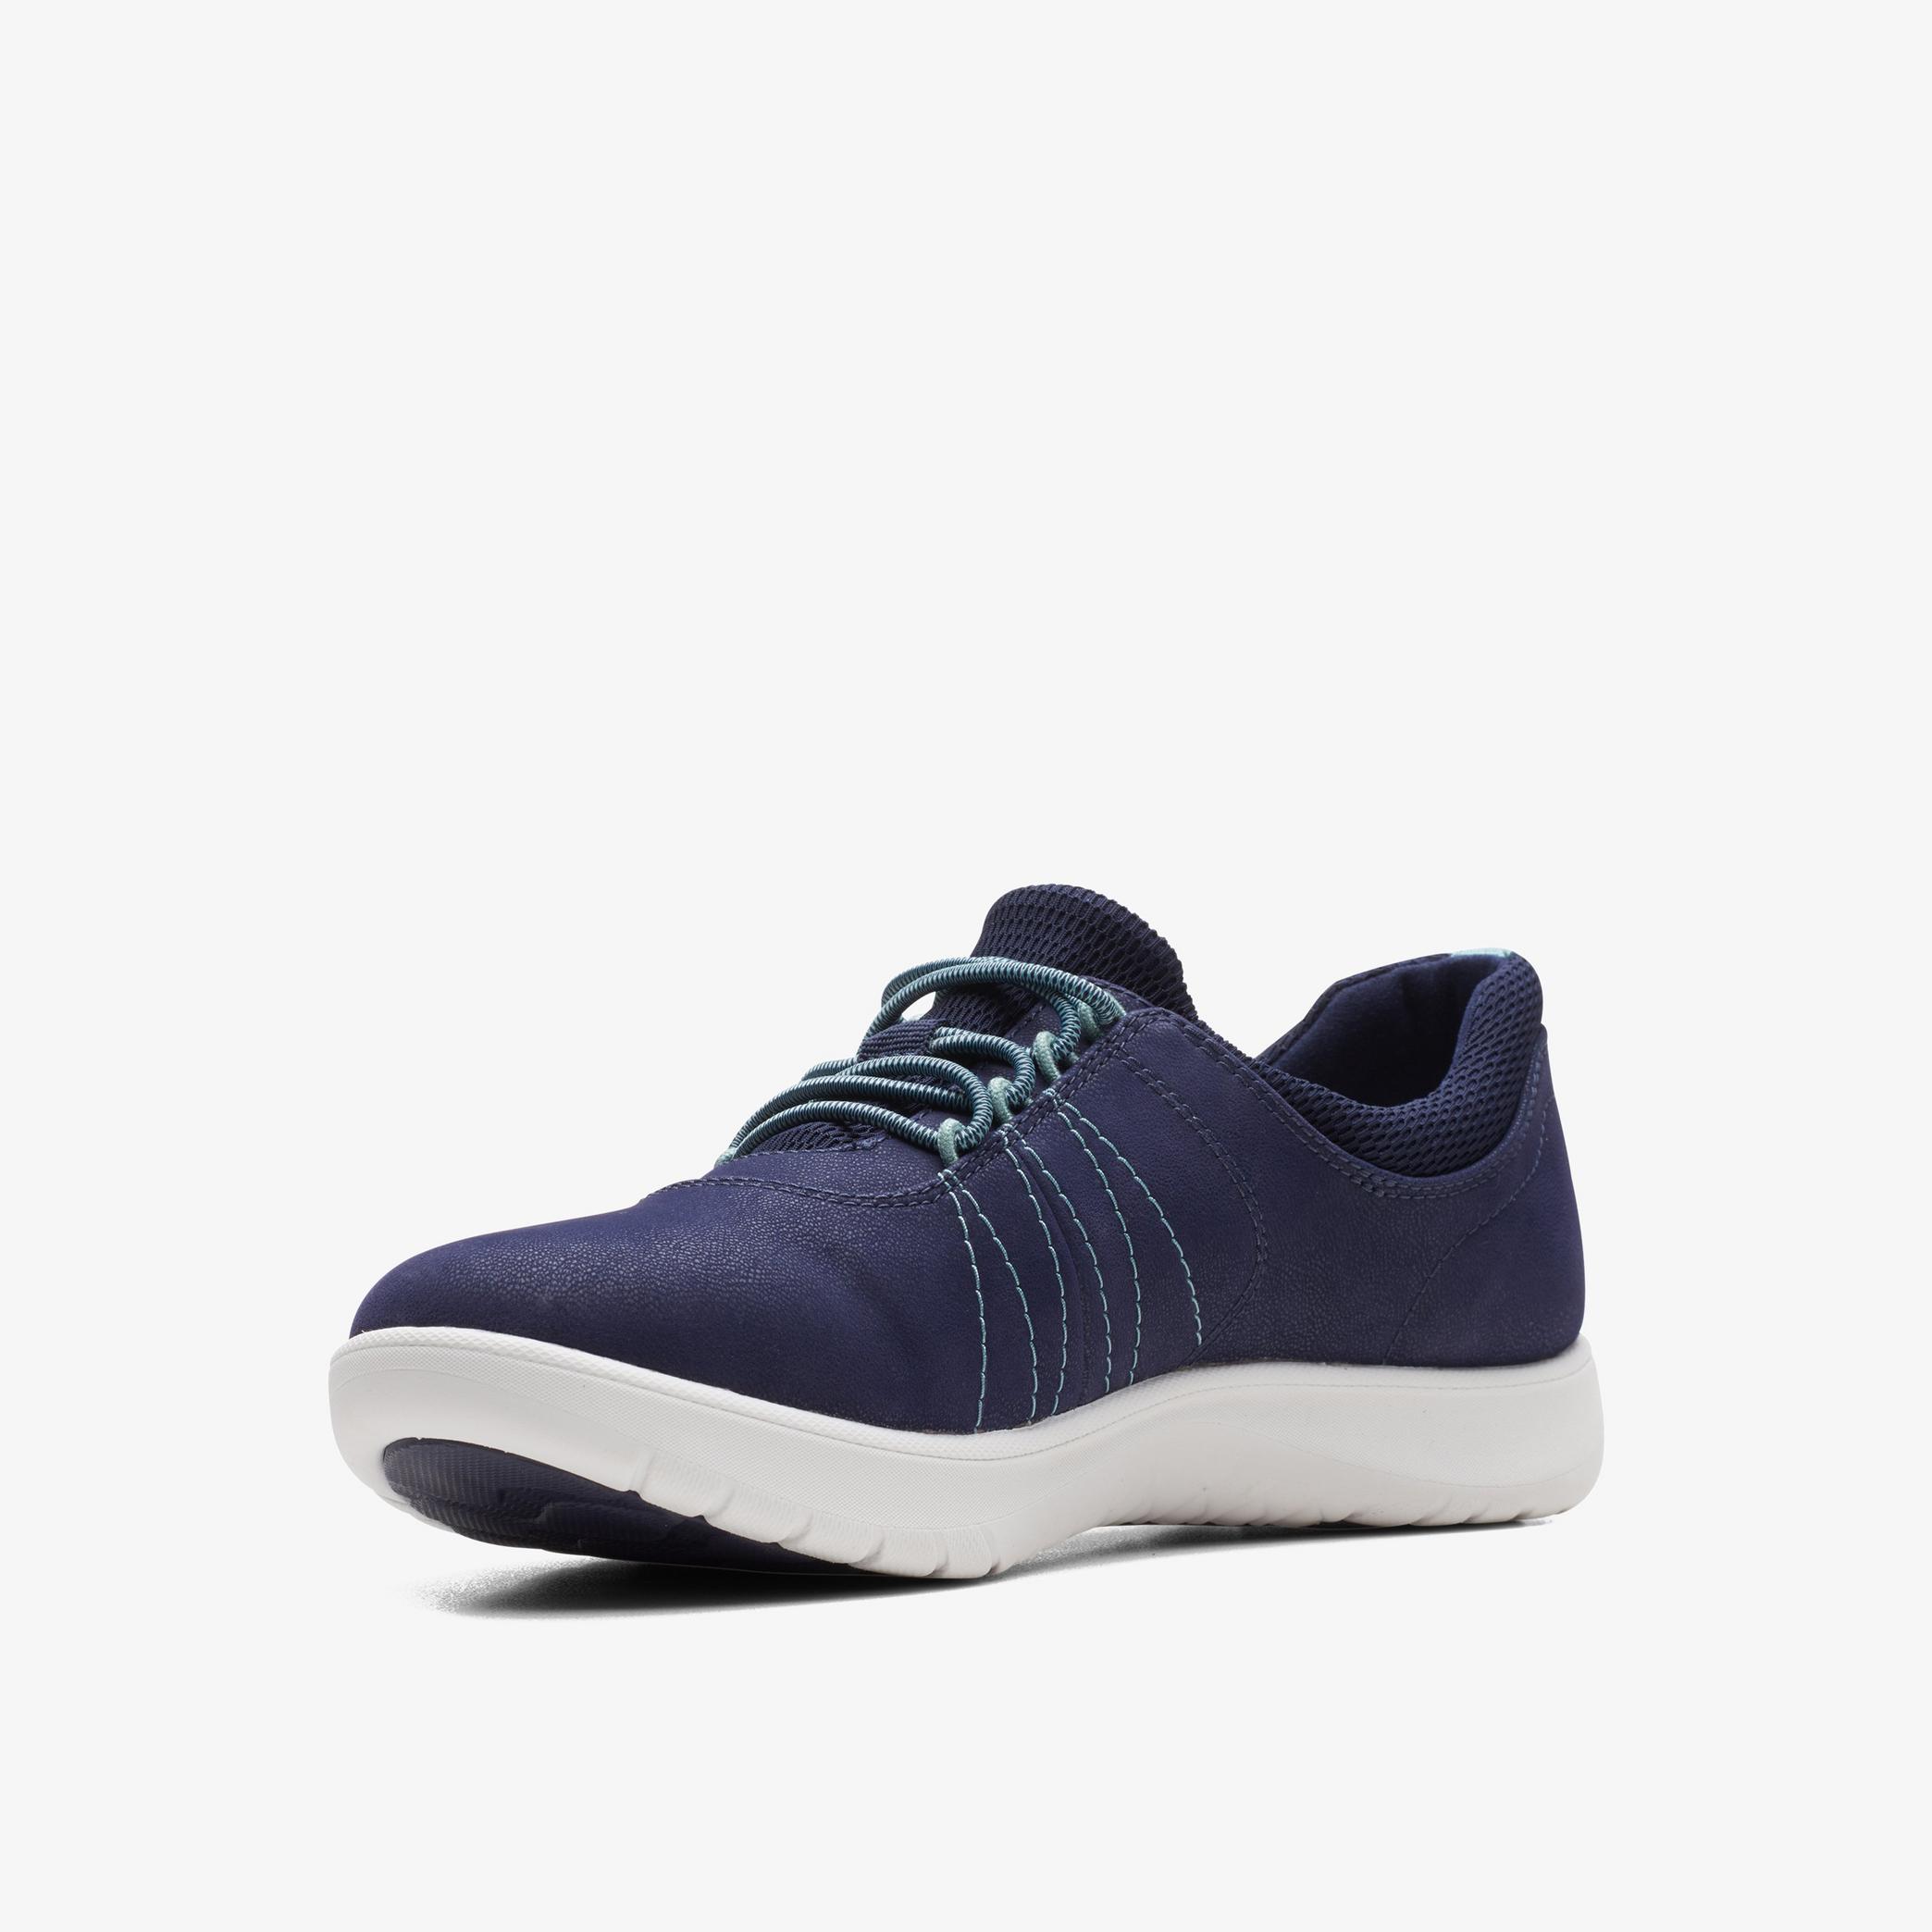 WOMENS Adella Stroll Dark Navy Trouser Shoes | Clarks Outlet